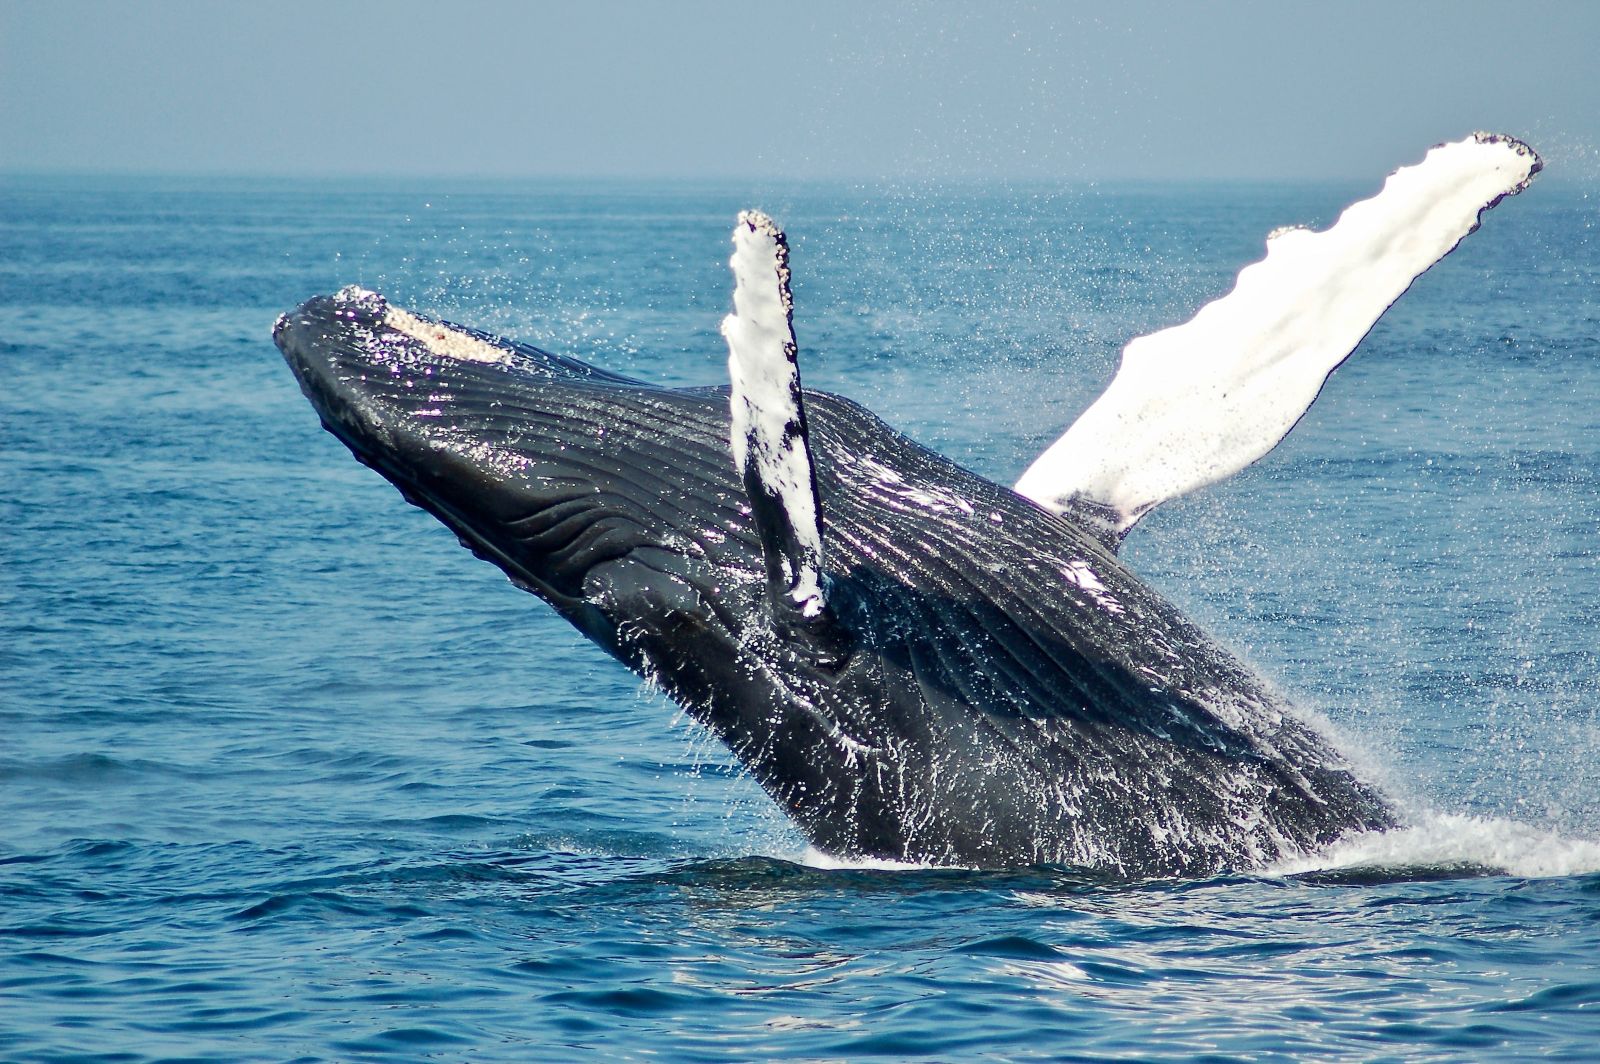 A whale breaching the waters of the Chiriqui Gulf in Panama